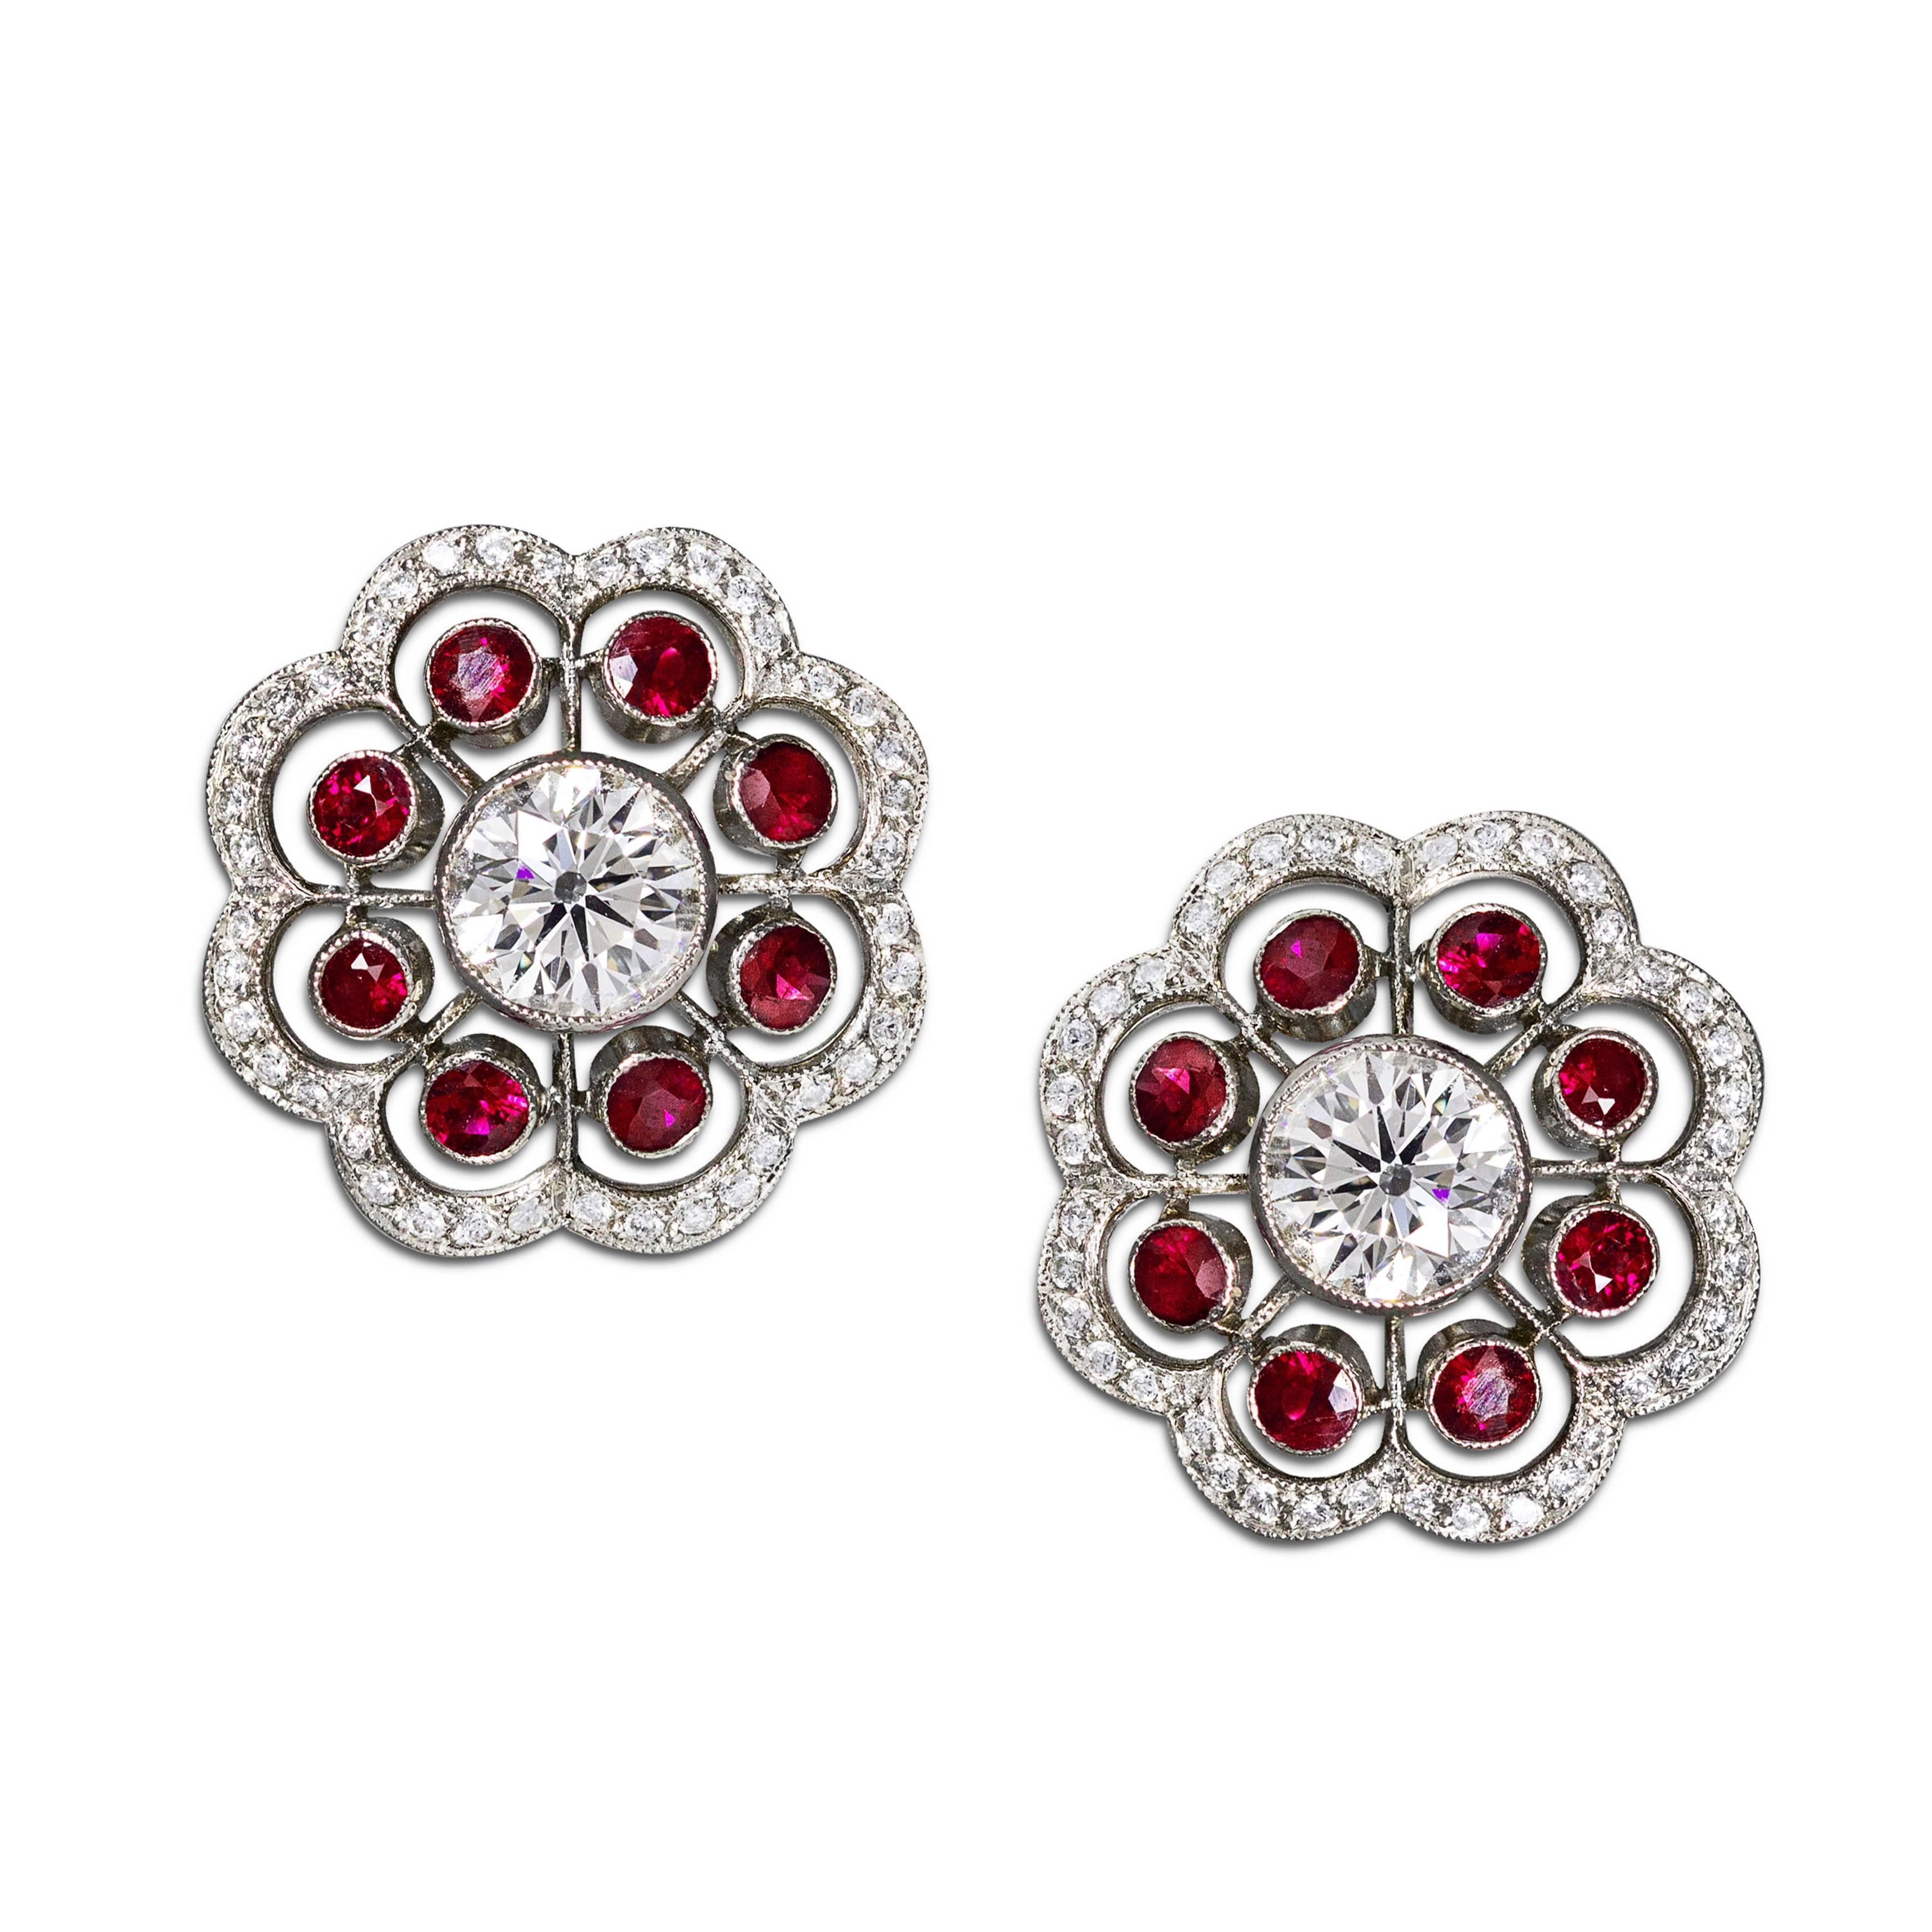 Roman Malakov 4.13 Carats Total Ruby and Diamonds Floral Motif Stub Earrings For Sale